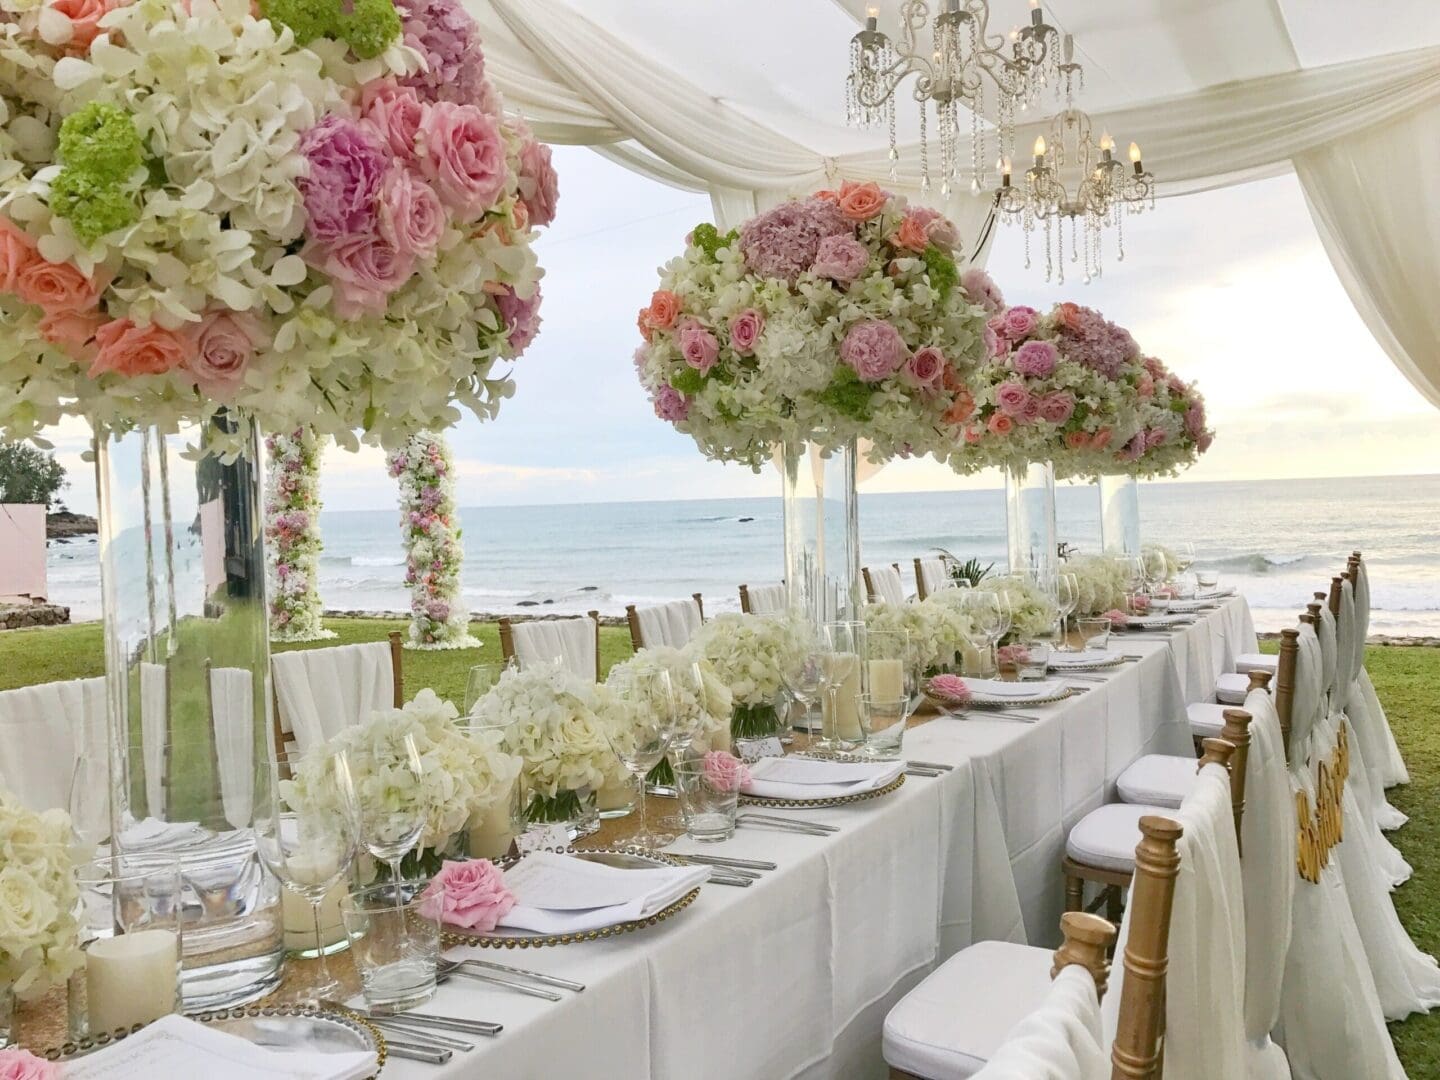 A wedding reception set up with white and pink flowers.